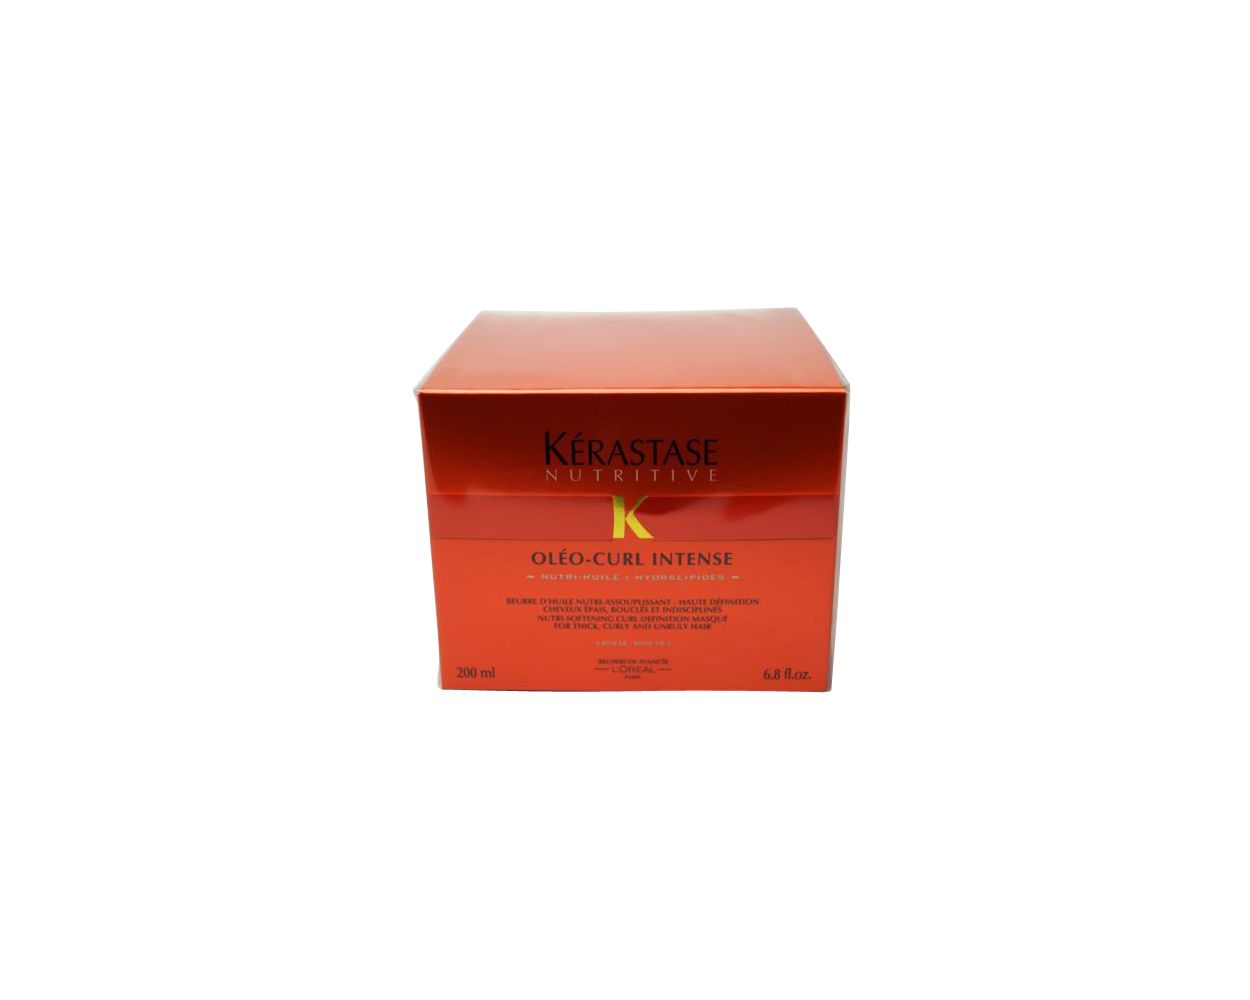 Kerastase Nutritive Oleo |Curl Intense Masque Thick Curly Hair | Conditioner -